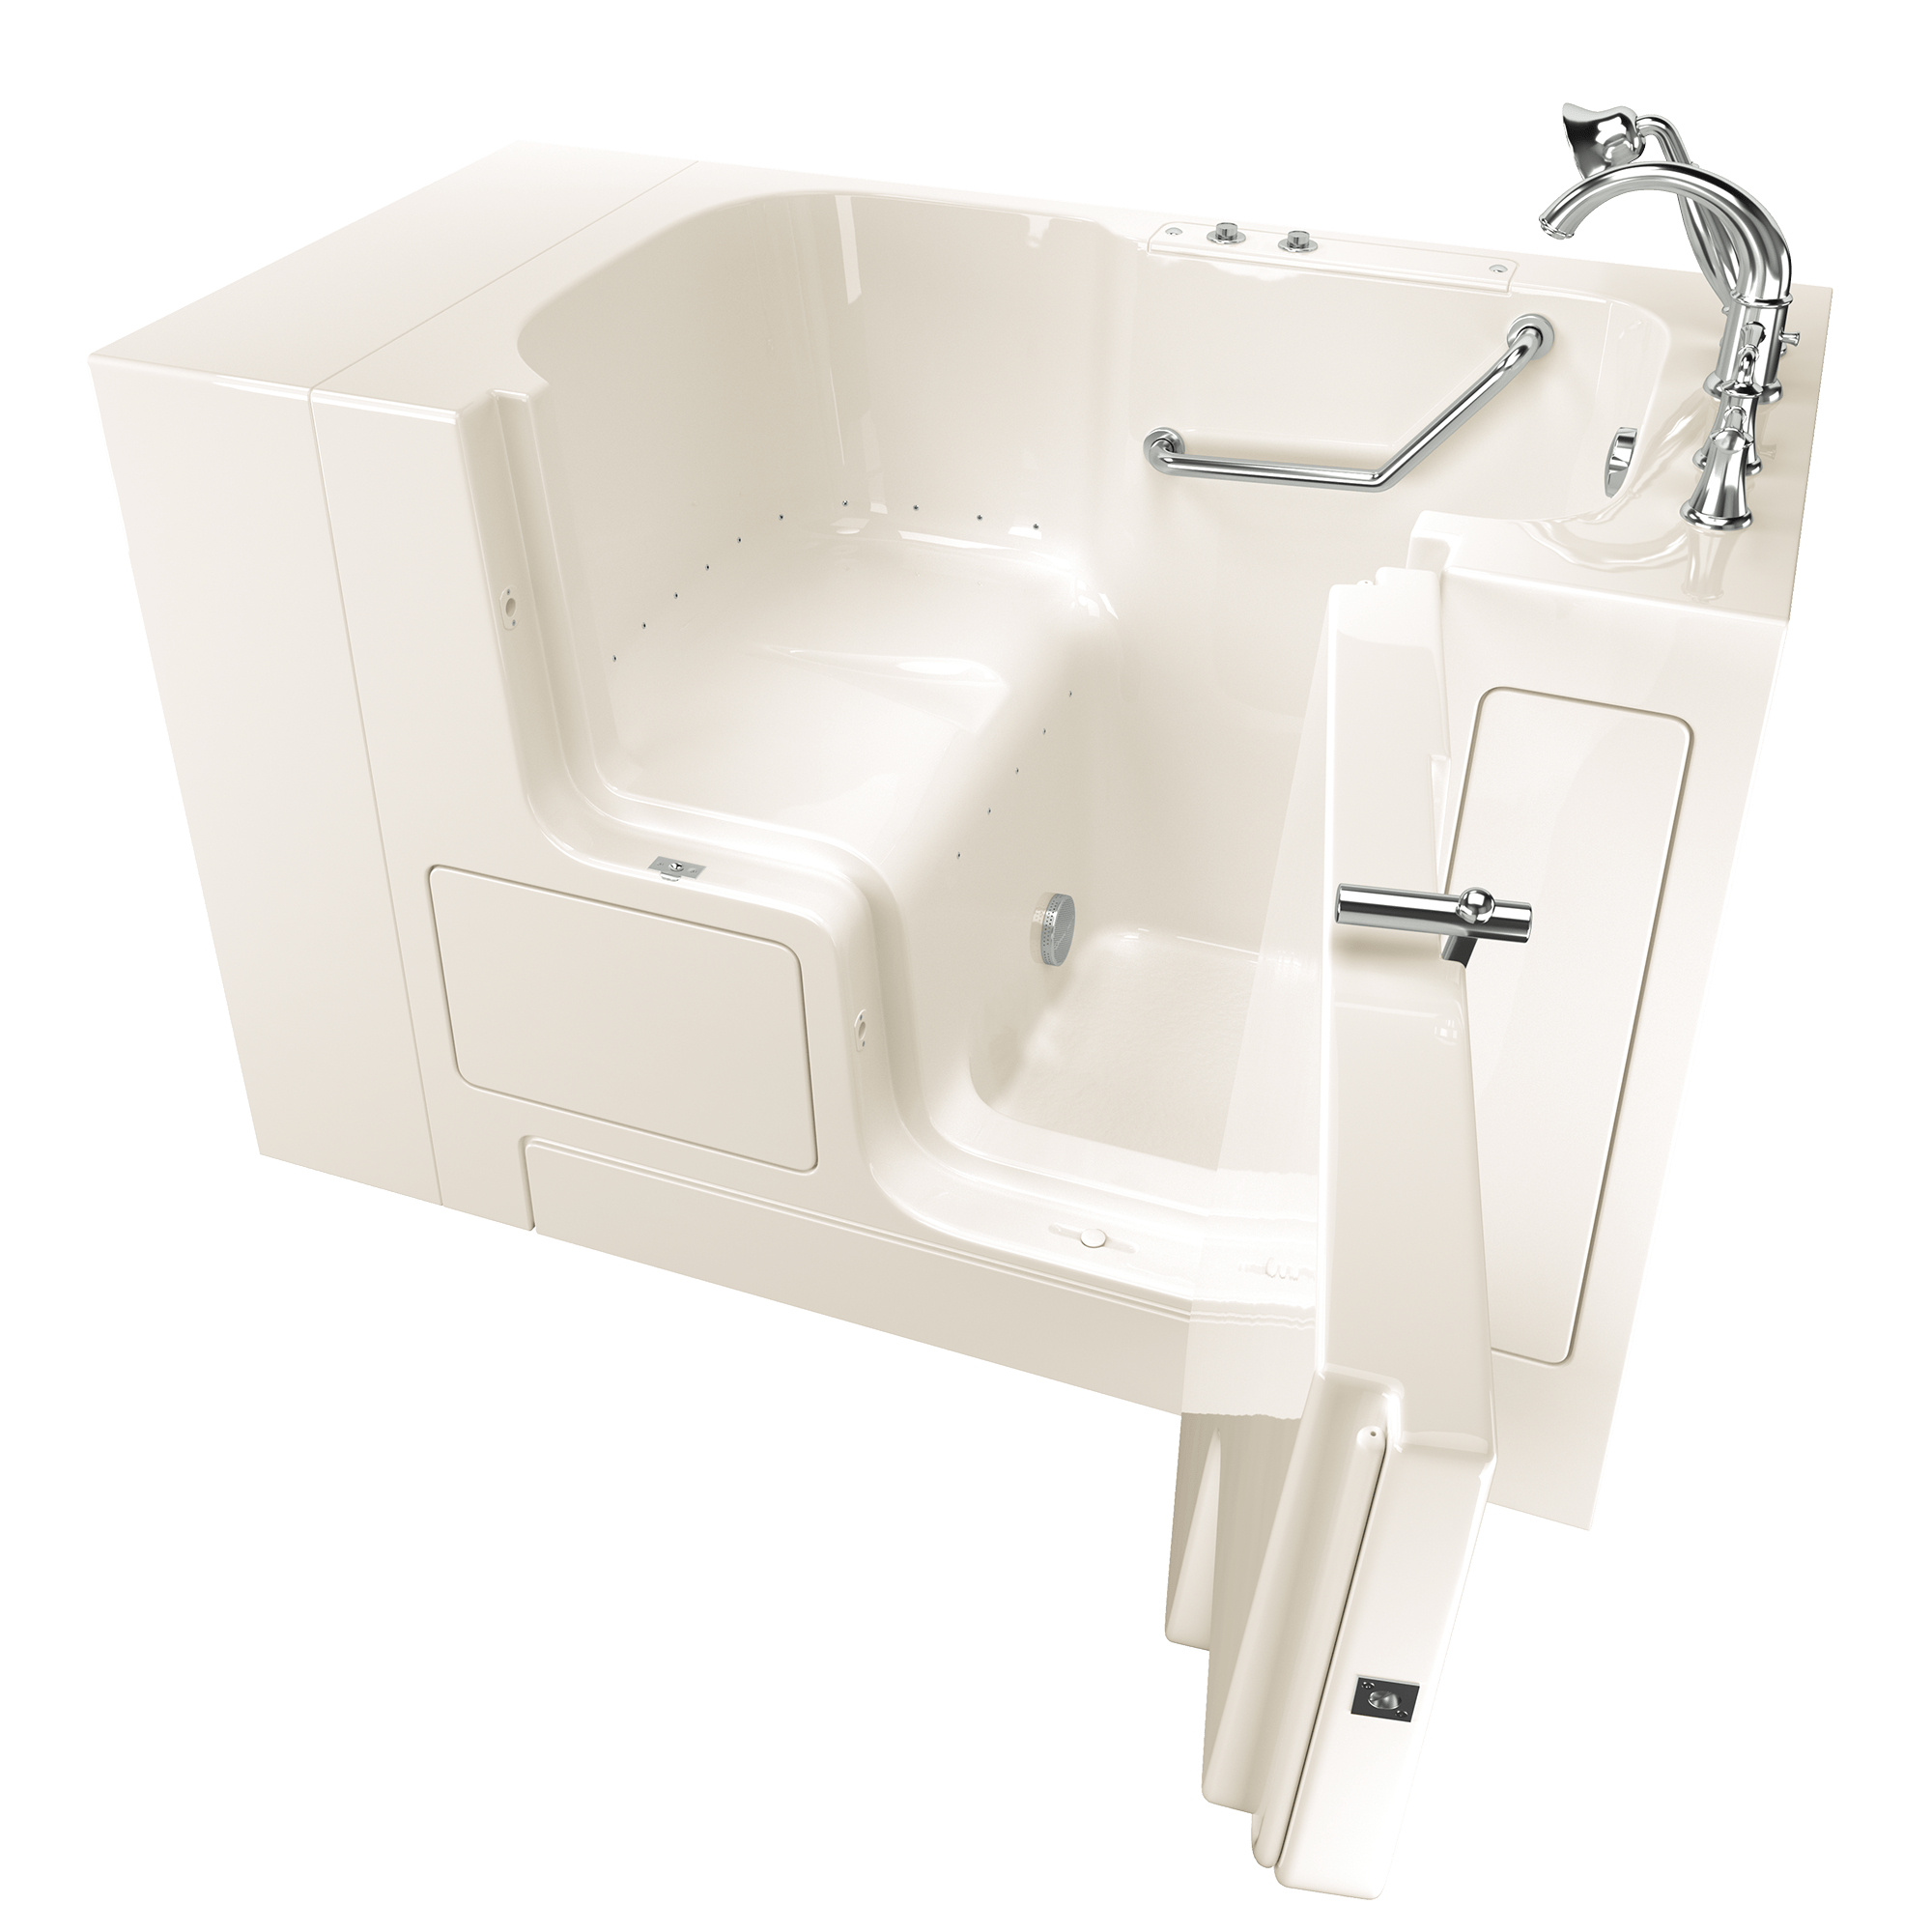 Gelcoat Value Series 32 x 52  Inch Walk in Tub With Air Spa System   Right Hand Drain With Faucet WIB LINEN